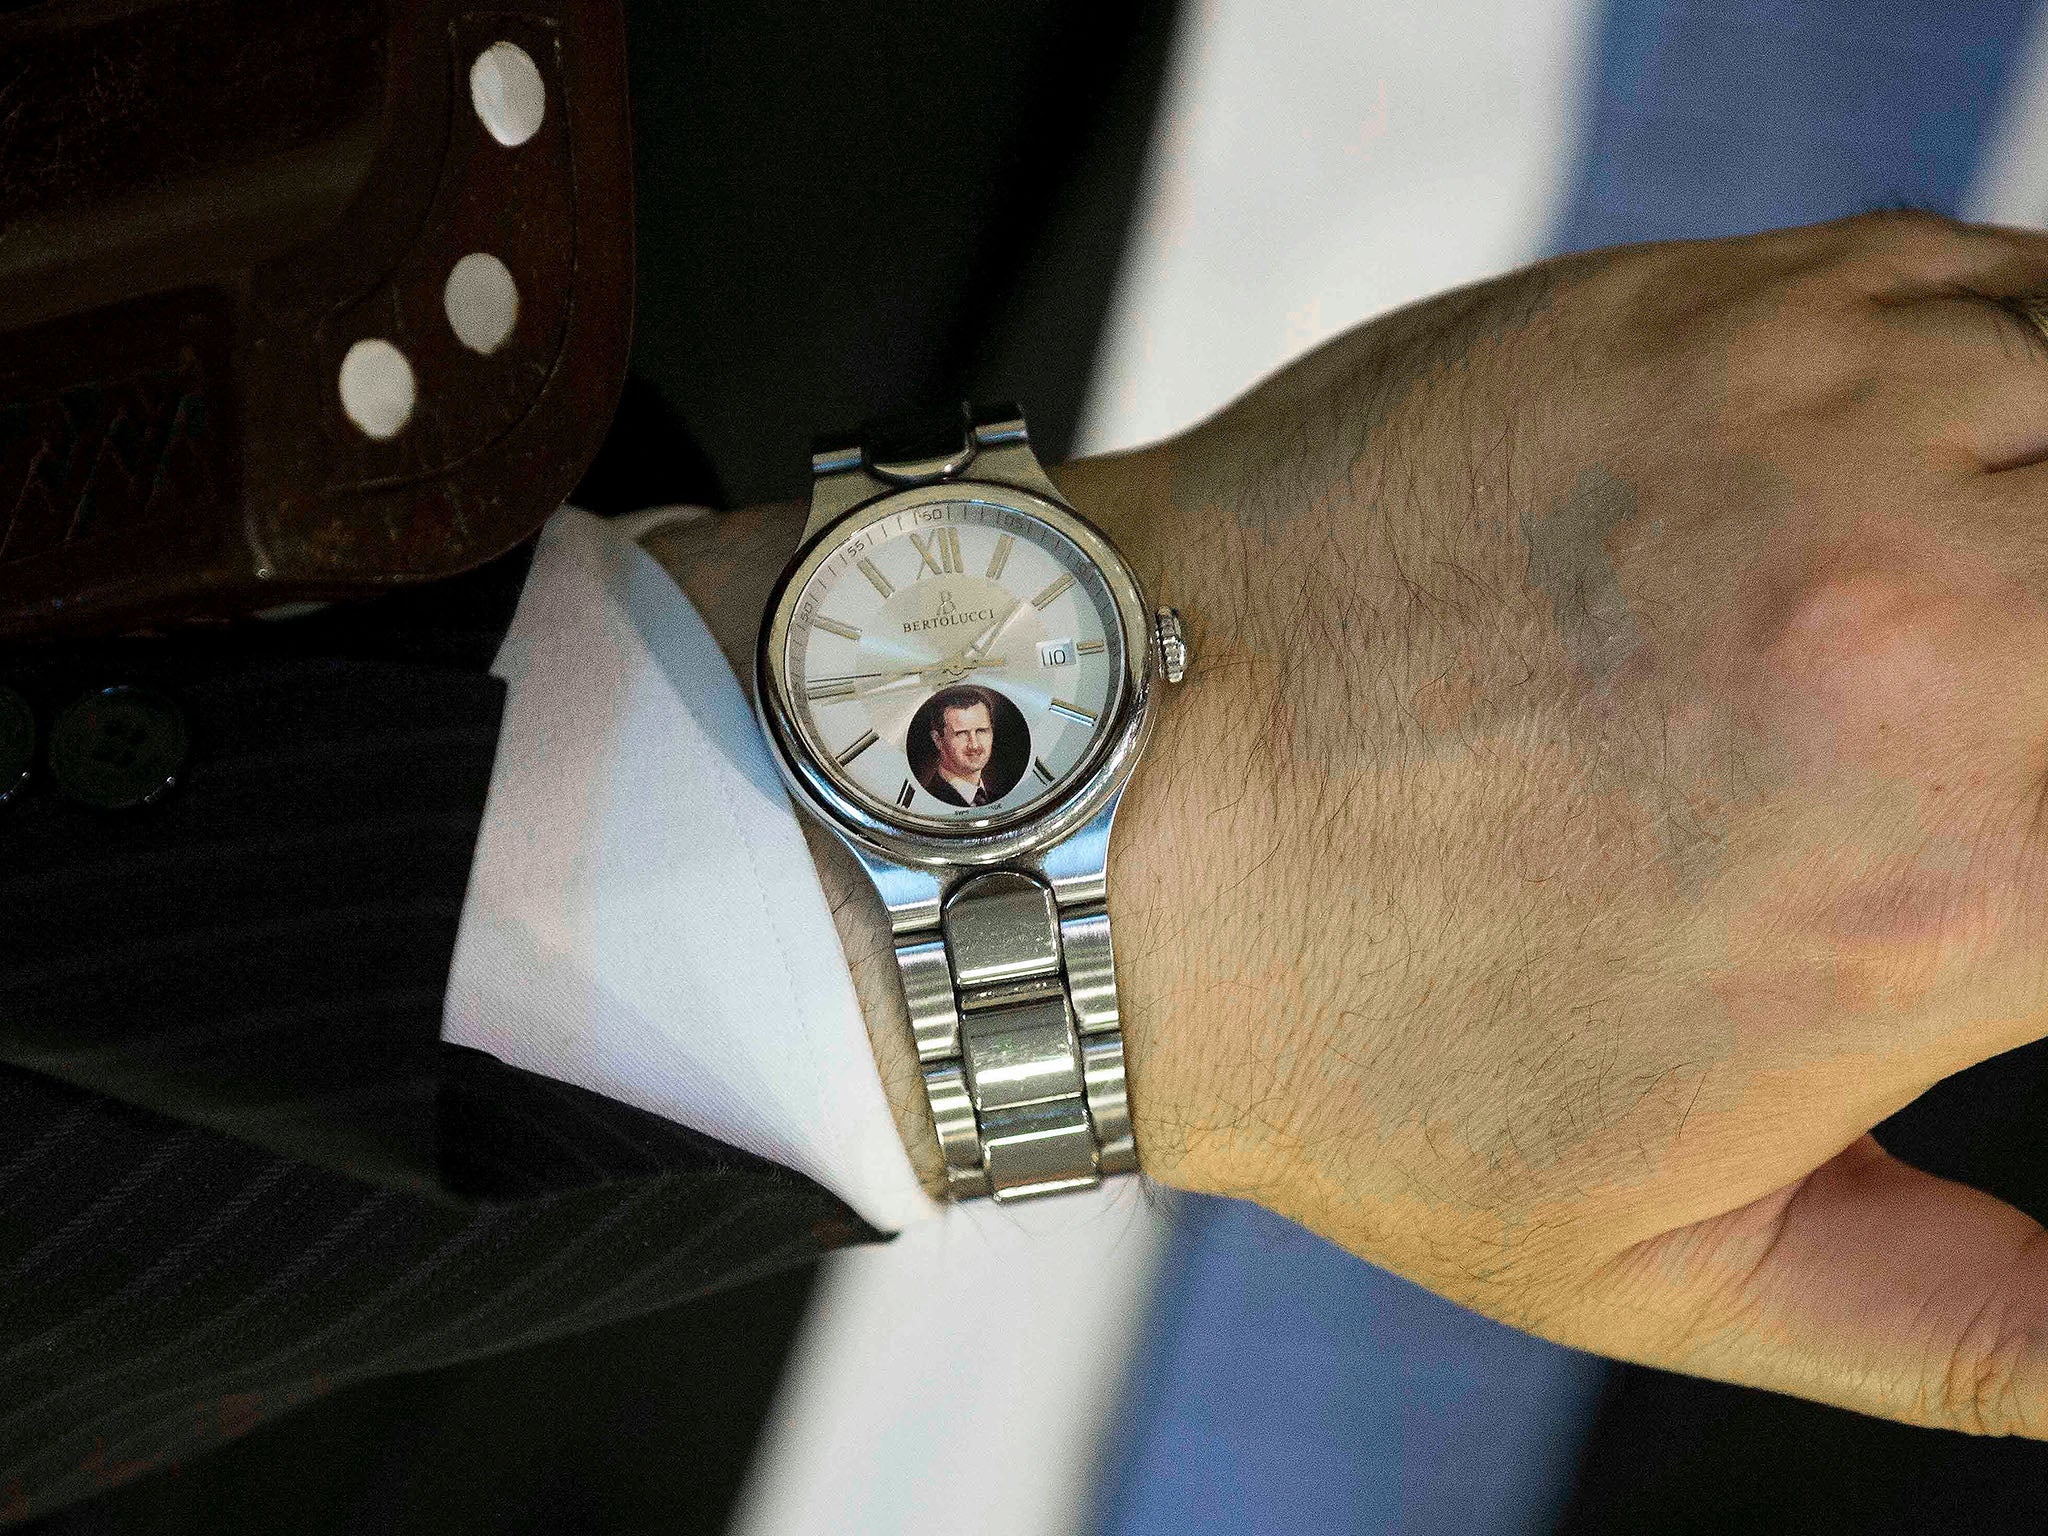 Syrian minister Faisal Mekdad's watch, featuring a picture of his President, Bashar al-Assad